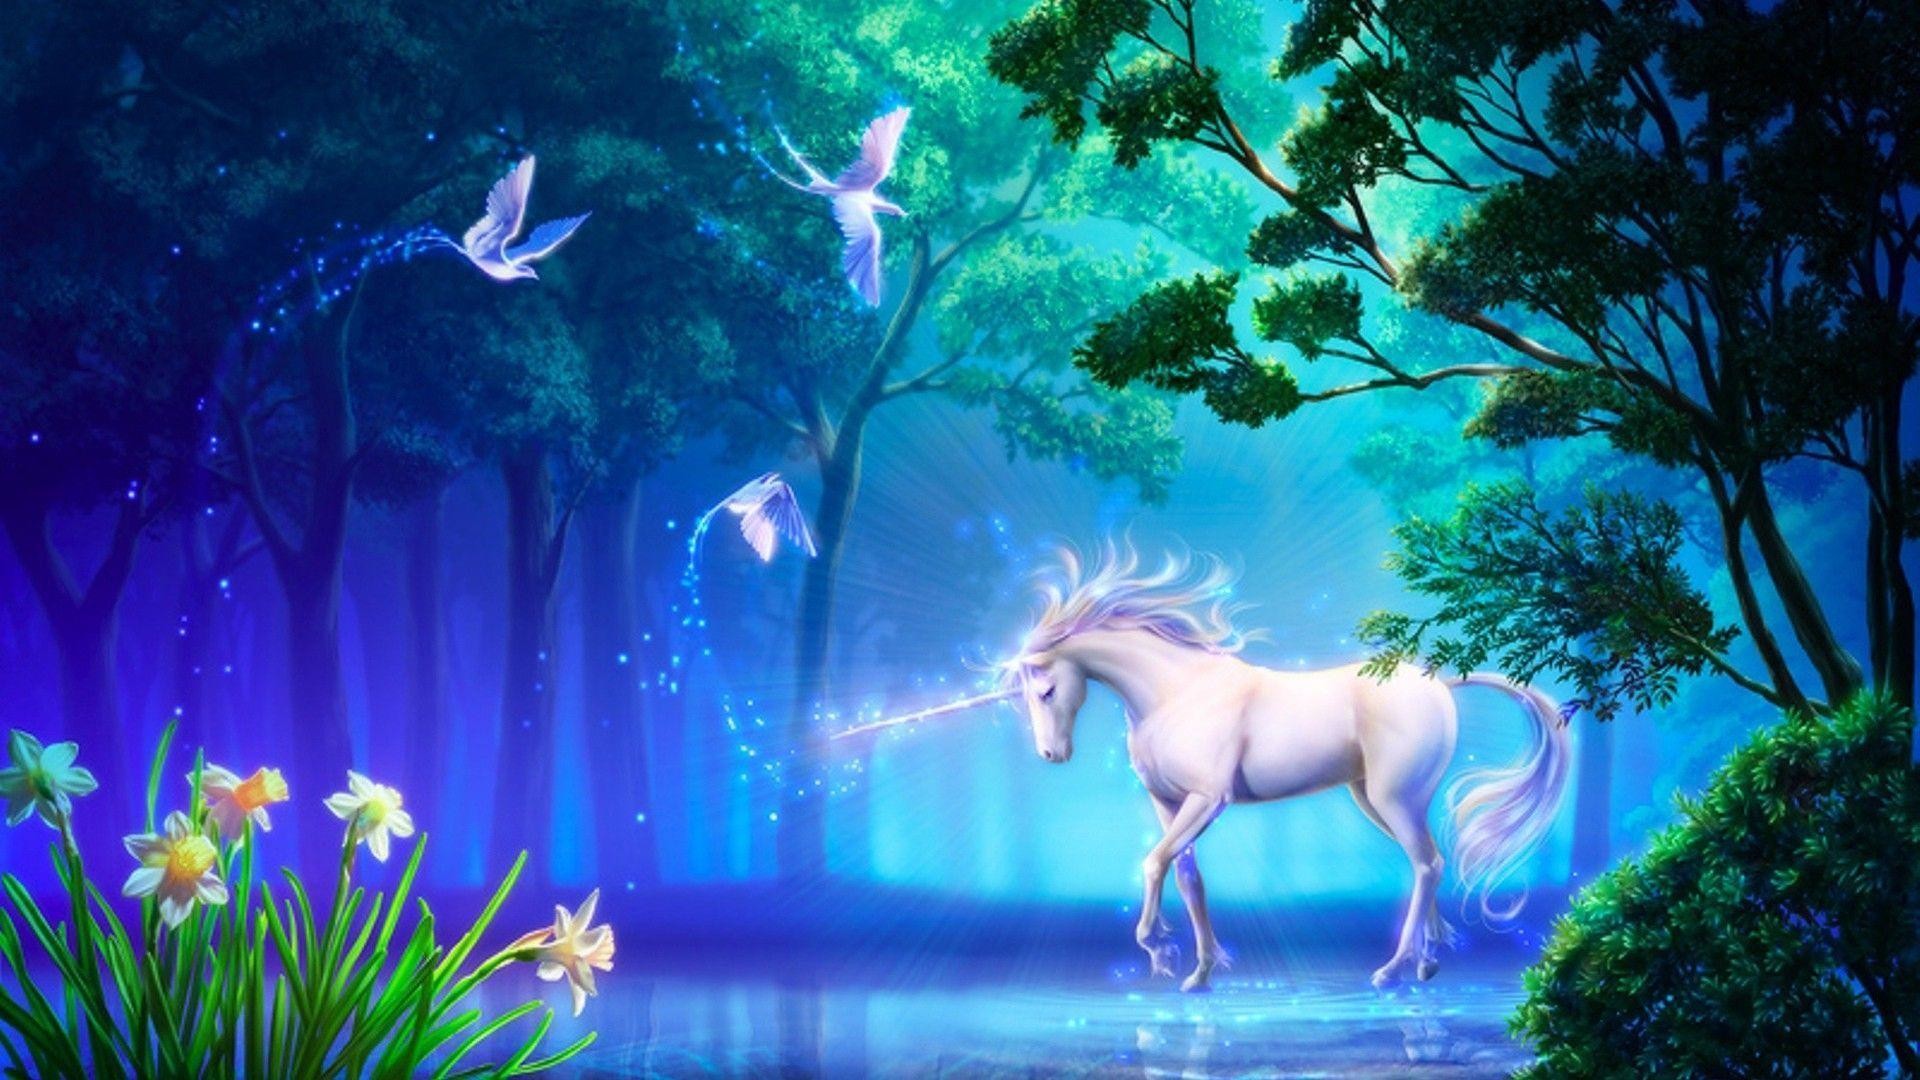 wallpaper hd 1080p free download,unicorn,fictional character,natural landscape,mythical creature,sky